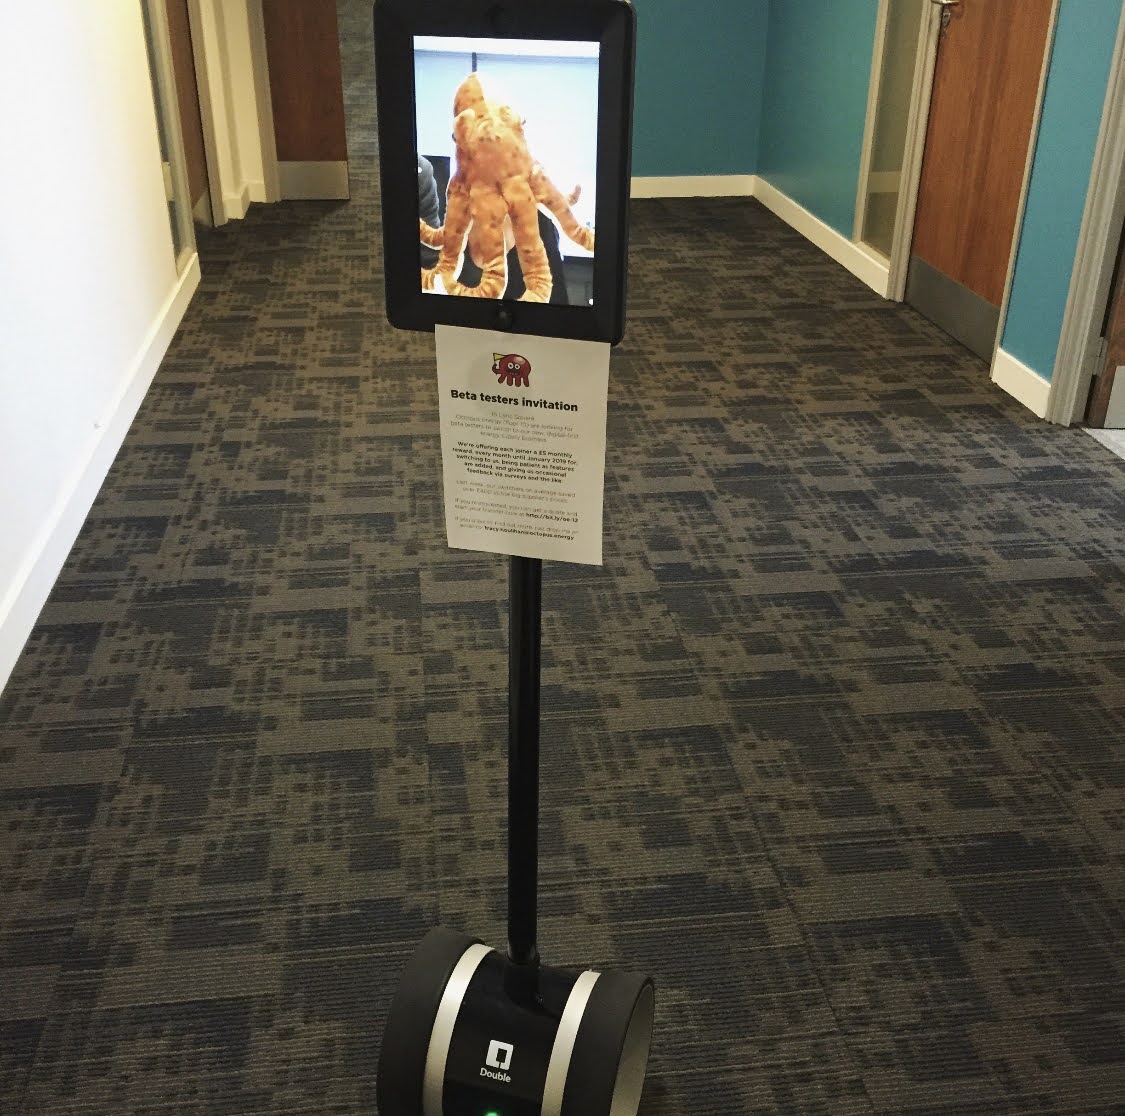 The contraption we used to encourage people to sign up for our beta program - an iPad on a motorised pole with a fluffy octopus on the screen